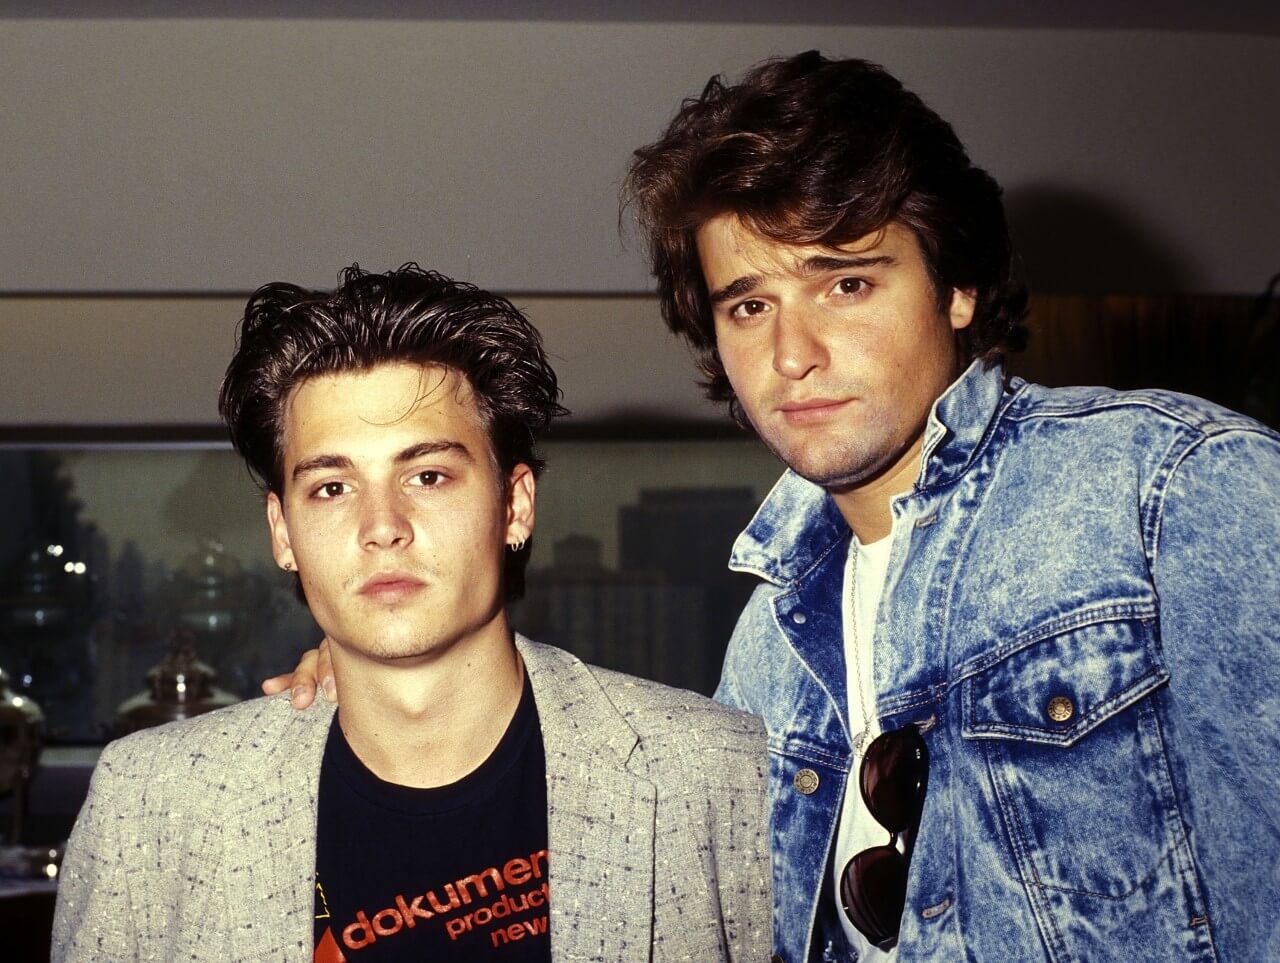 Johnny Depp and Peter DeLuise pose during a media event.